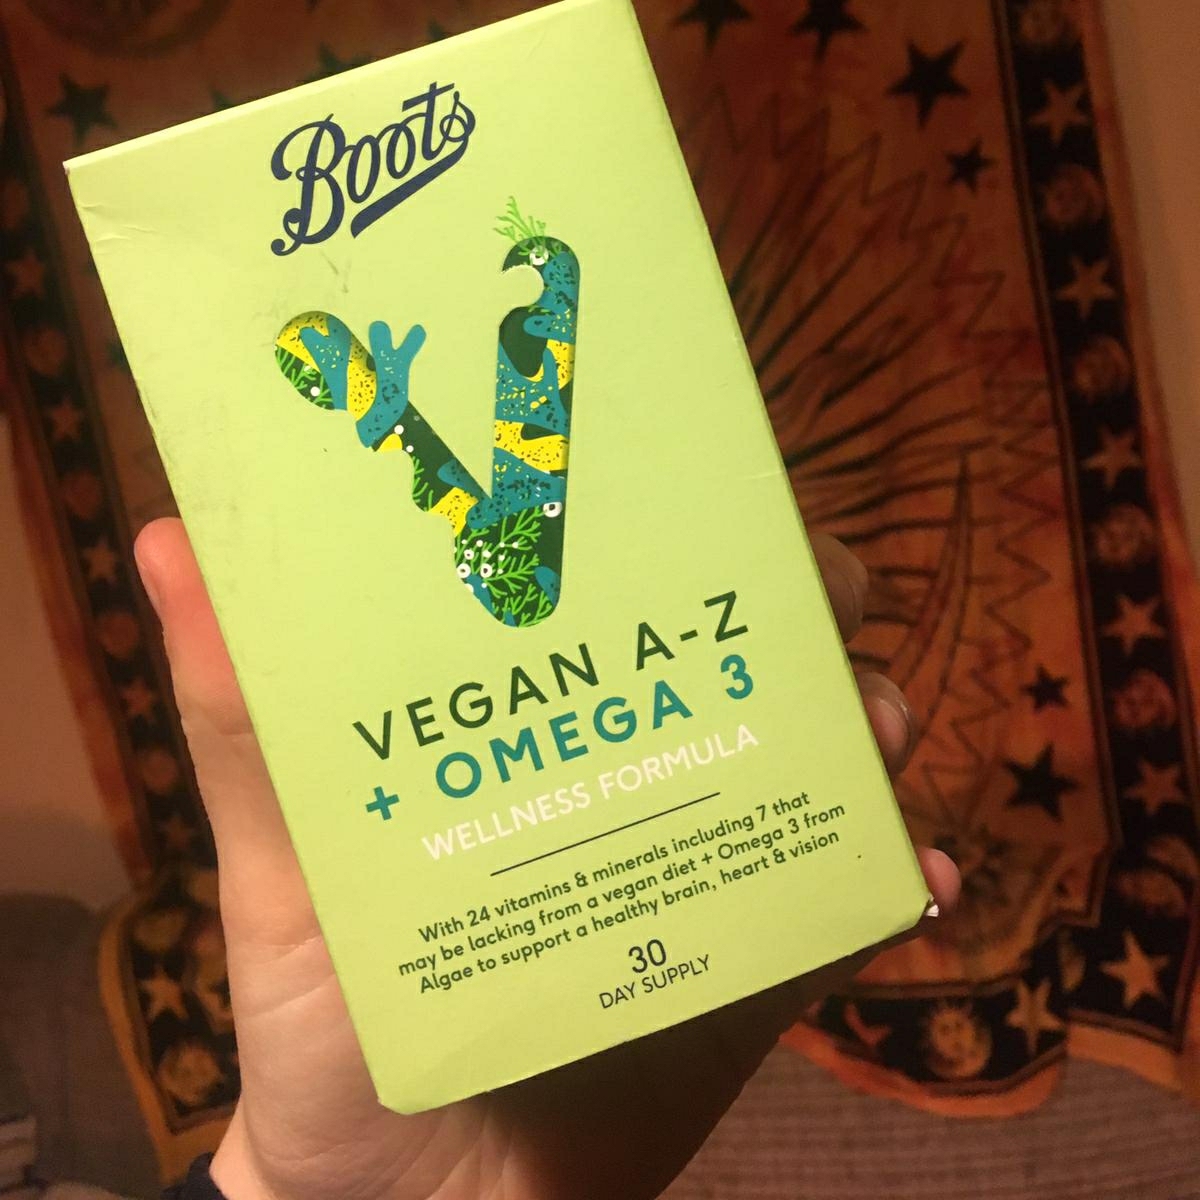 Boots vitamins a-z and omega 3 Reviews | abillion